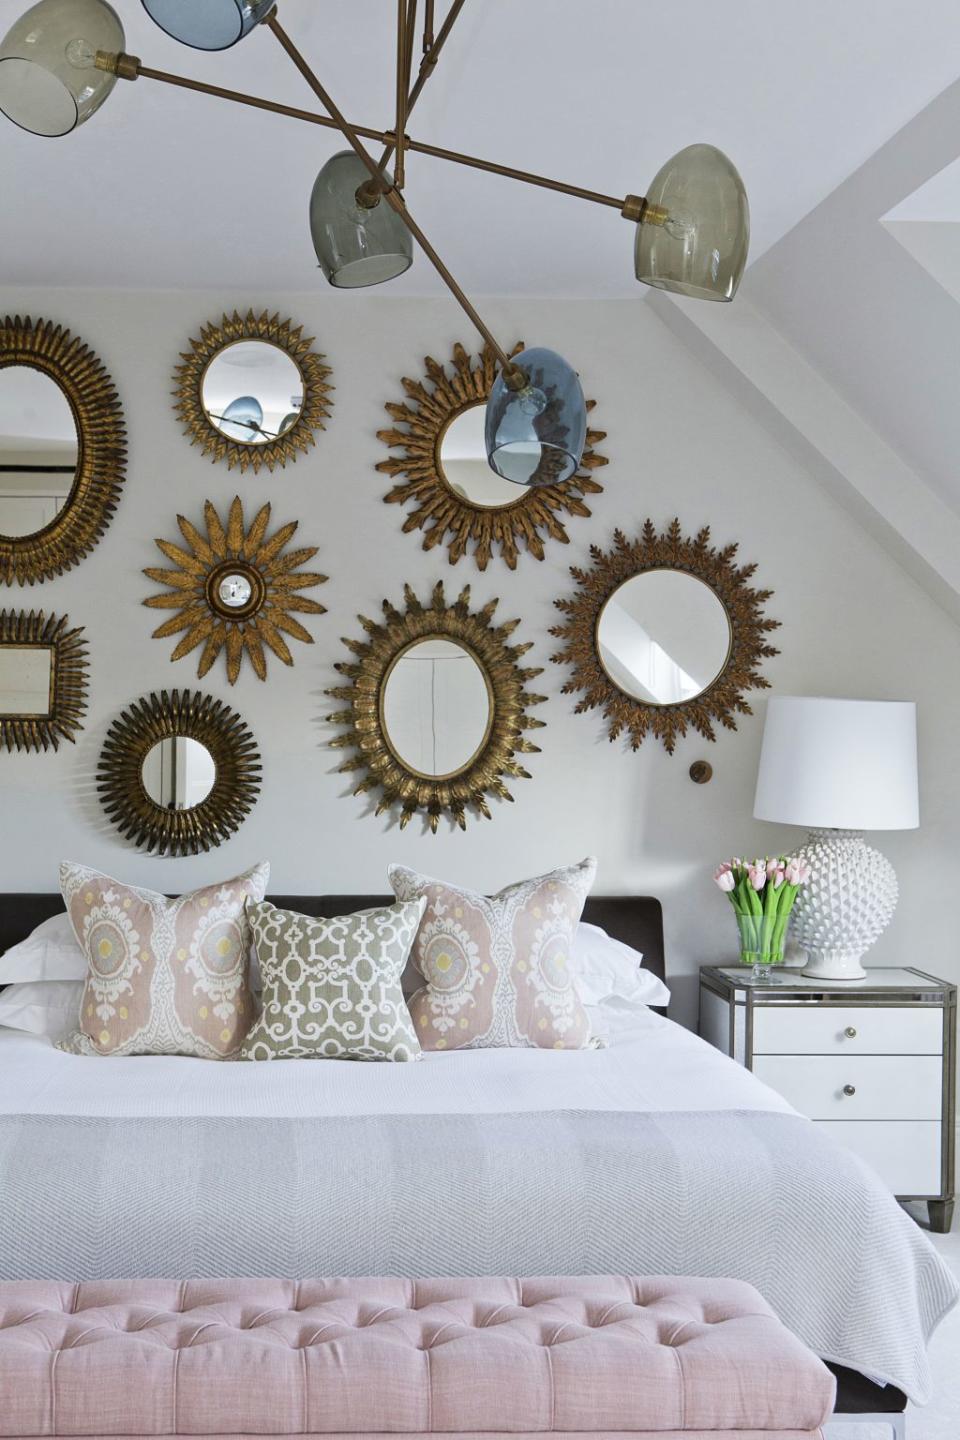 Create a gallery wall with mirrors